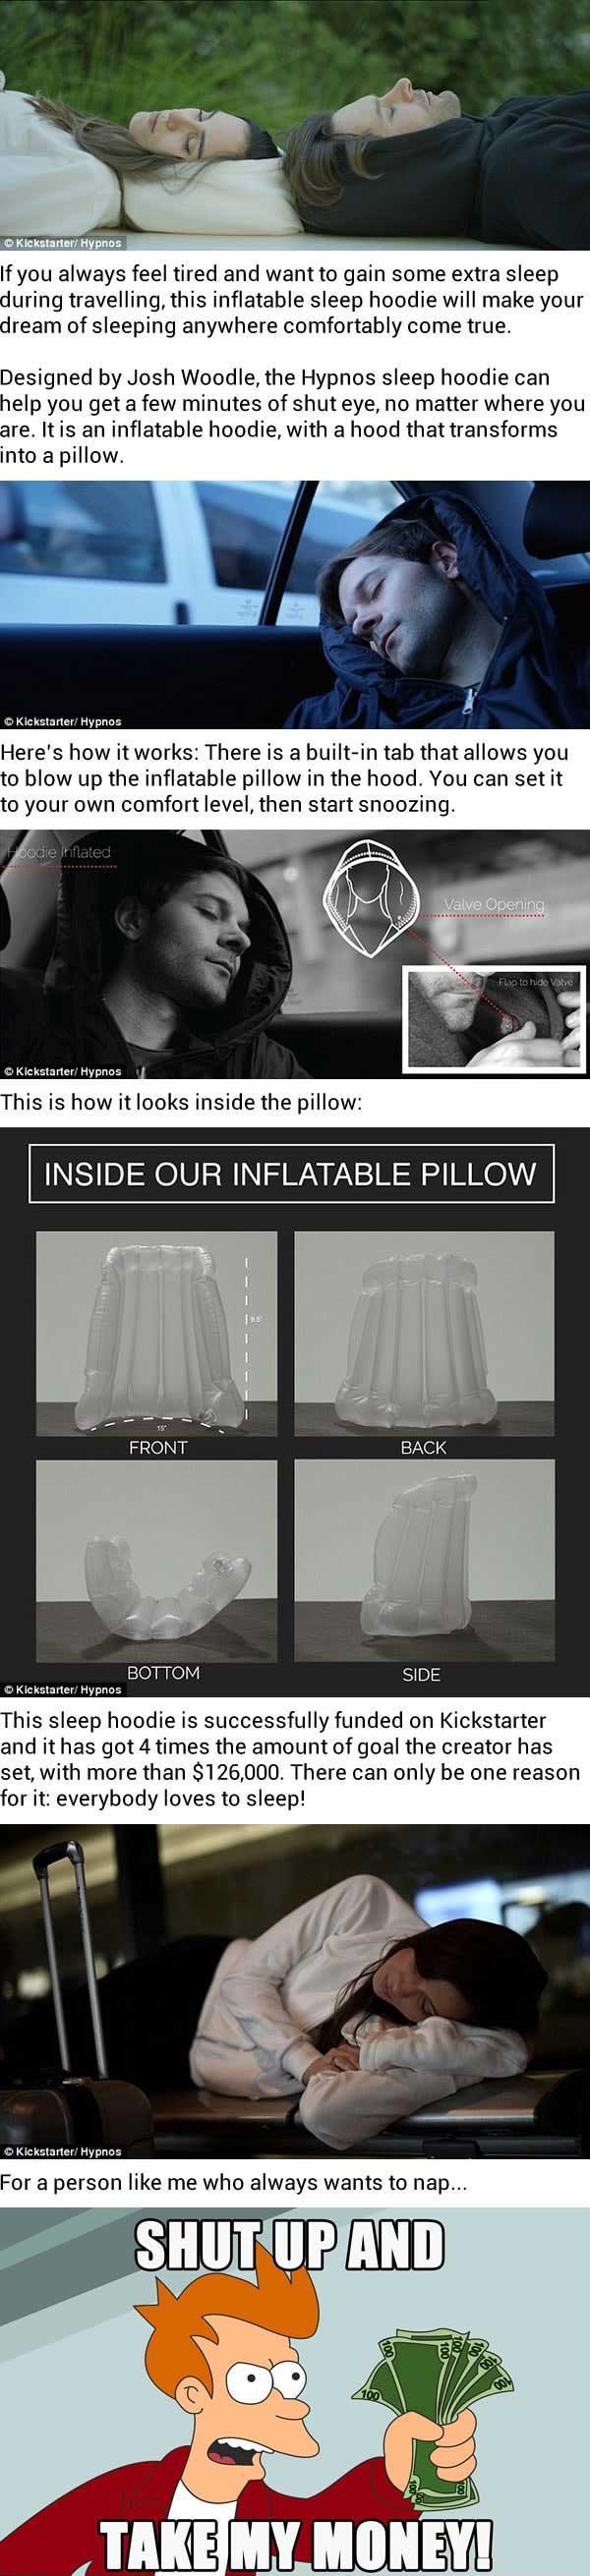 This Inflatable Sleep Hoodie Lets You Nap Anywhere, Anytime